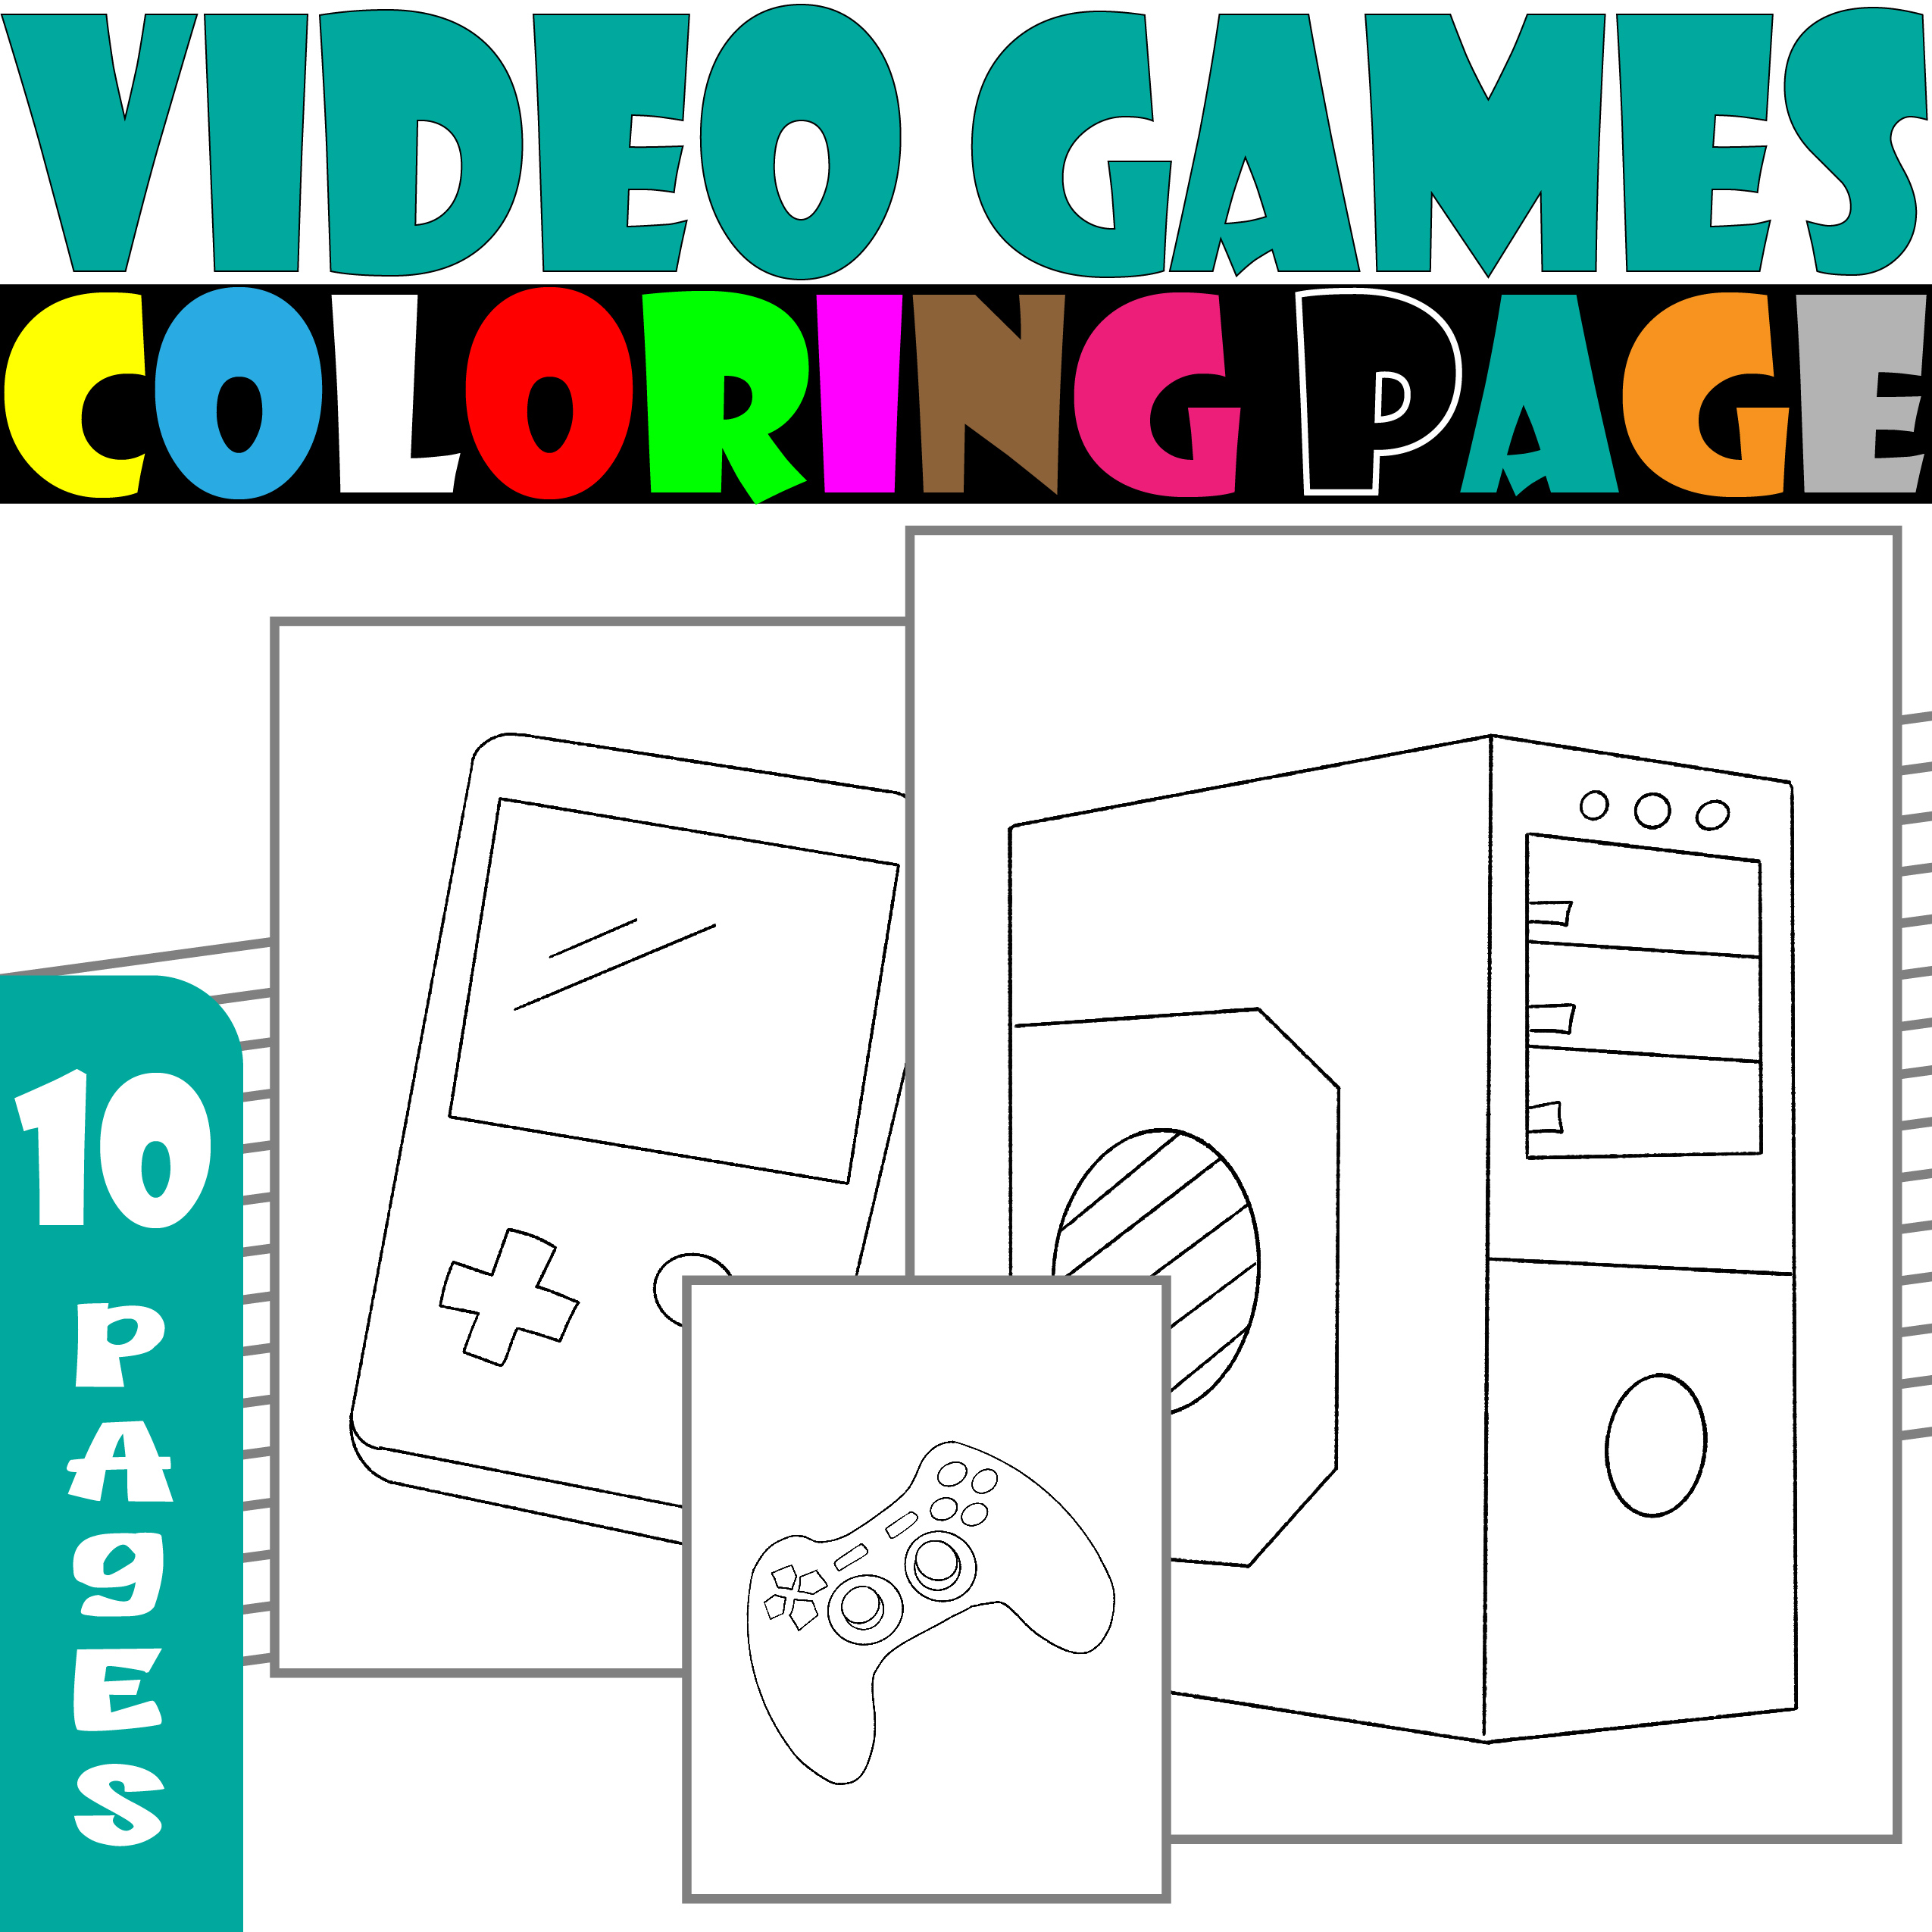 Ideo games coloring pages video games coloring sheets made by teachers